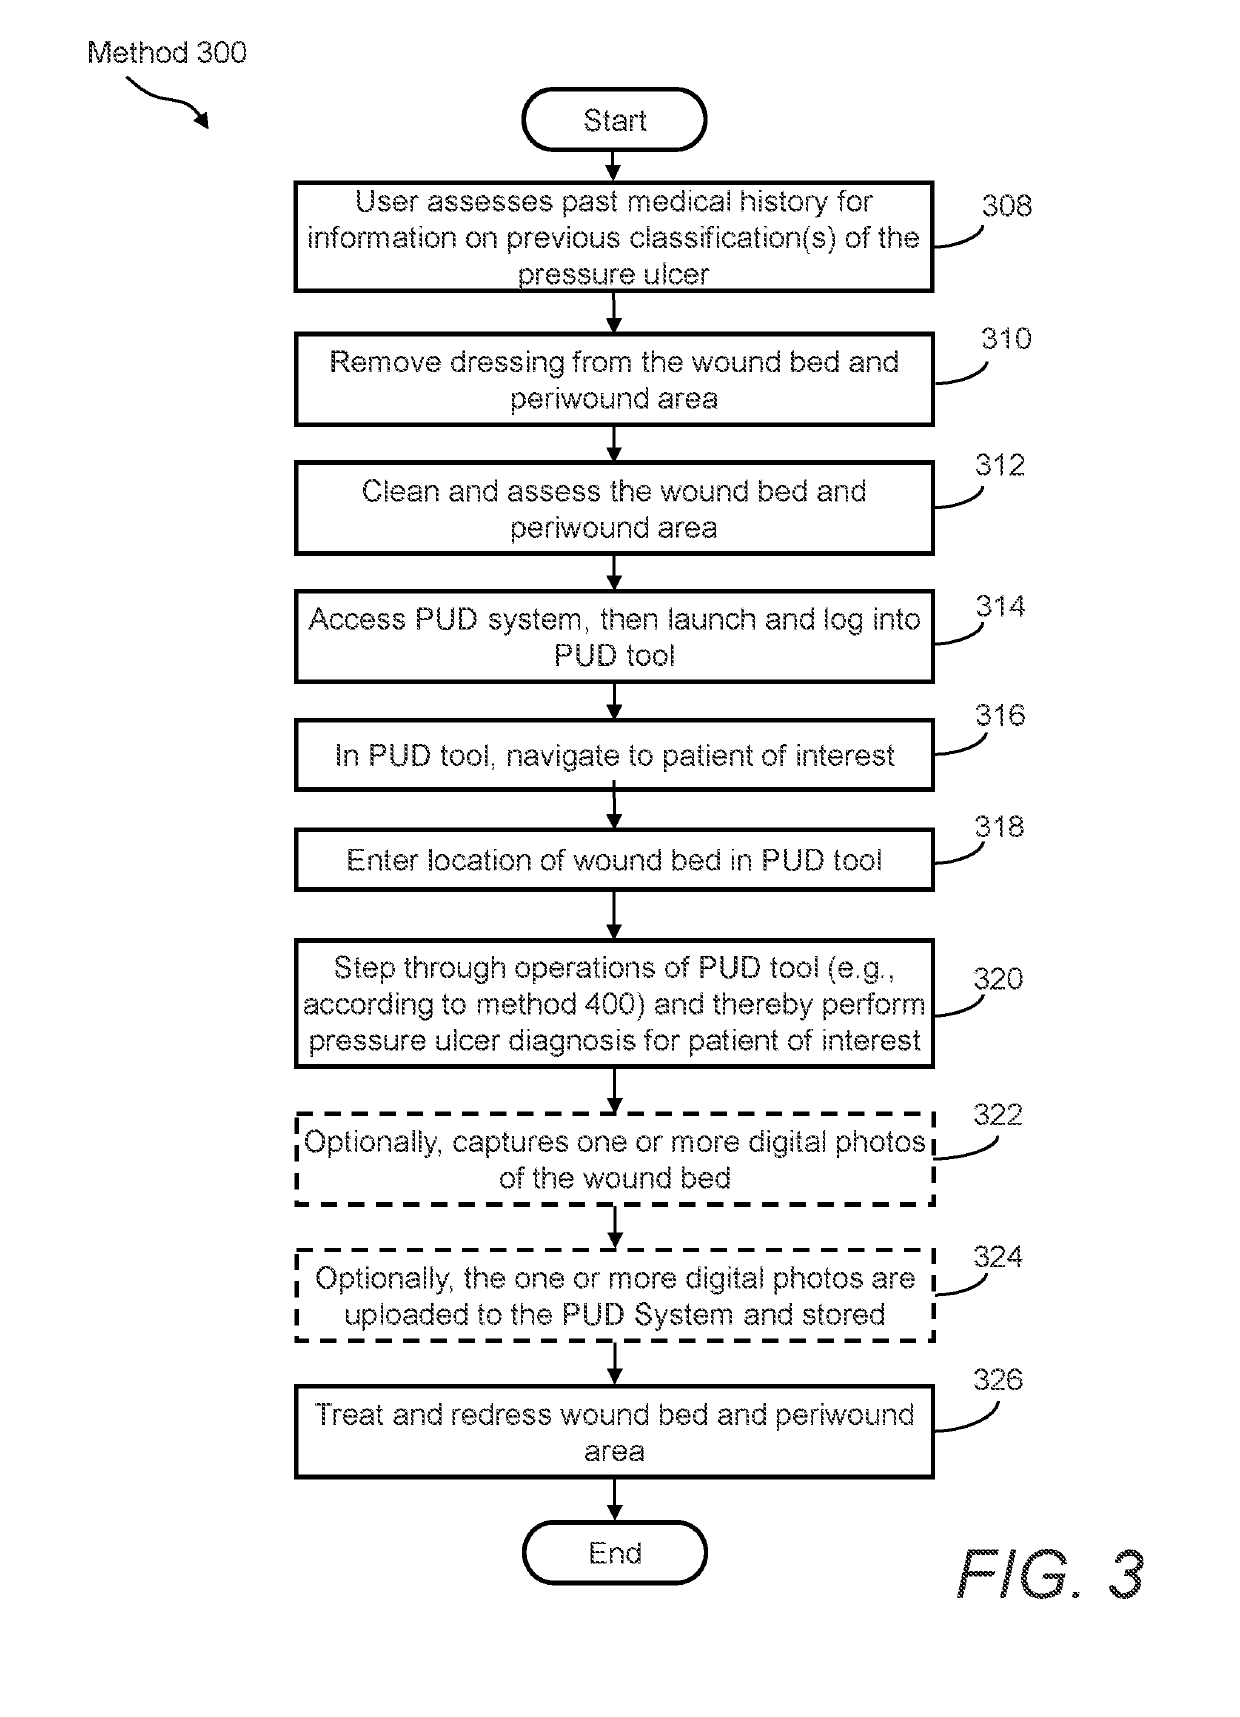 Systems and methods for classification and treatment of decubitus ulcers